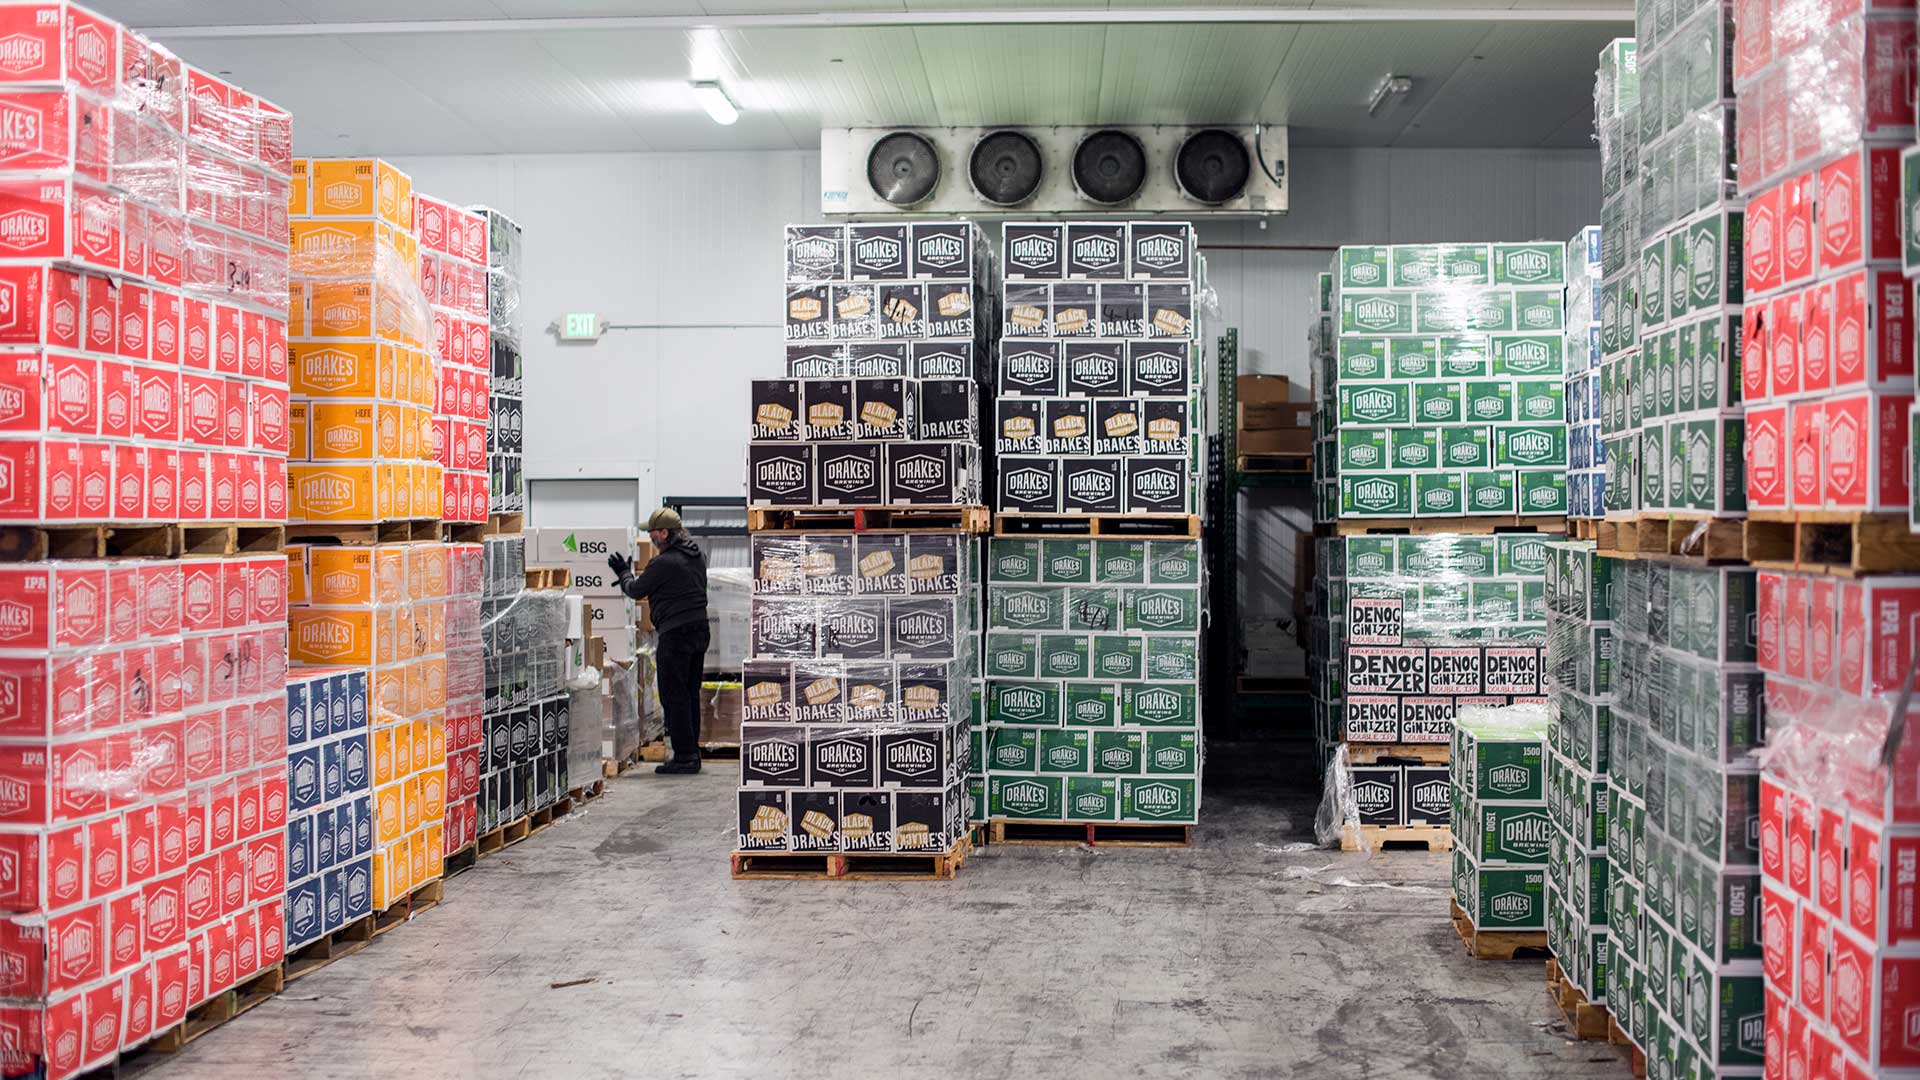 Interior view of Cold Box filled with pallets and cases of Drake's beer